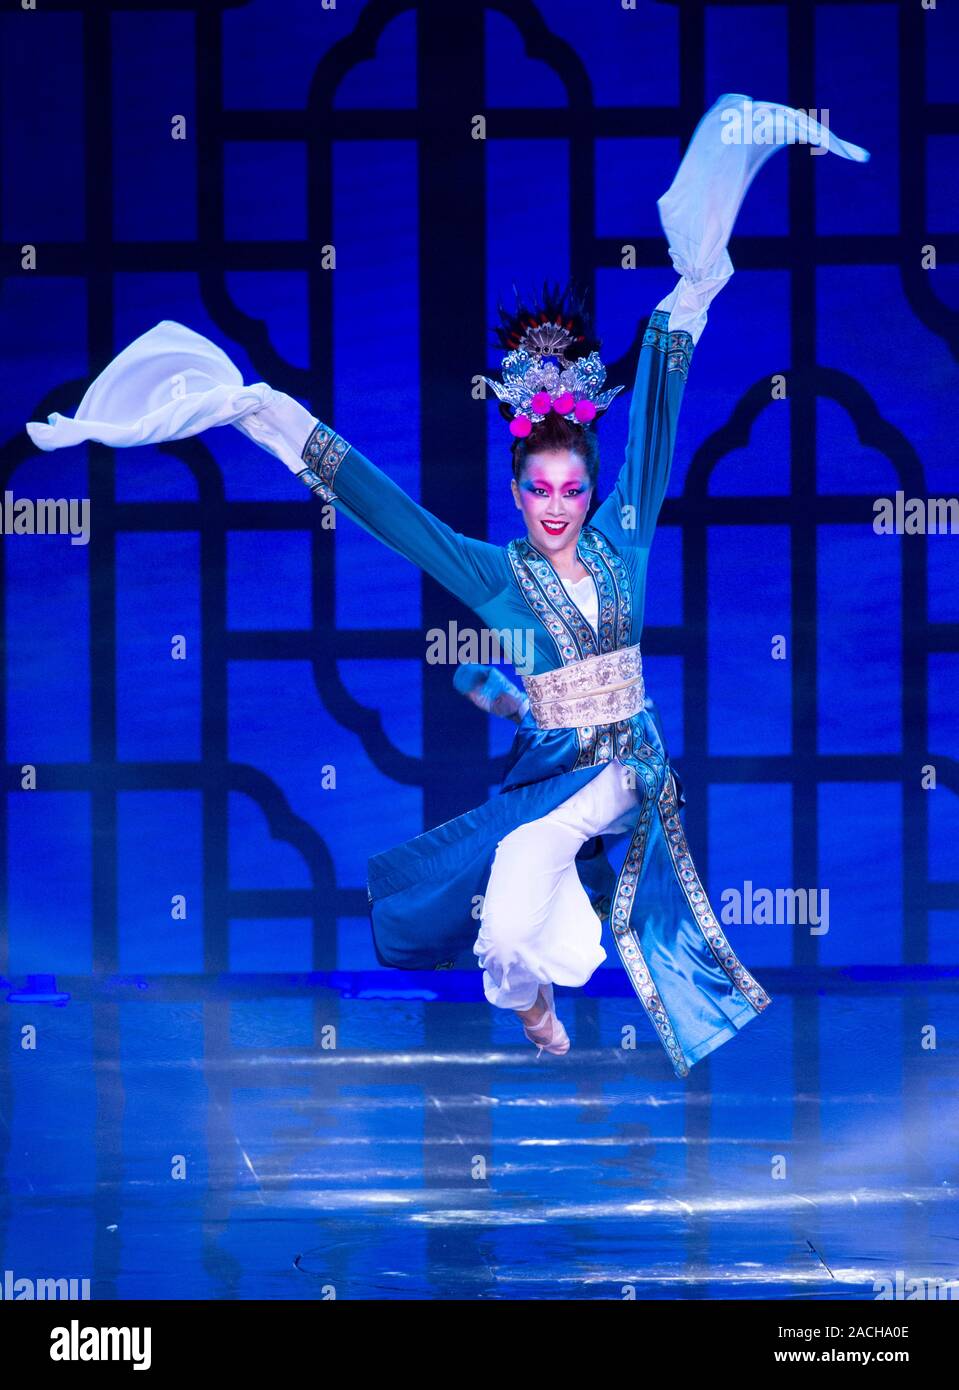 HONG KONG,CHINA: DECEMBER 2,2019 AFC Annual Awards. Traditional Chinese Long Sleeve dance.Jayne Russell/Alamy stock image Stock Photo